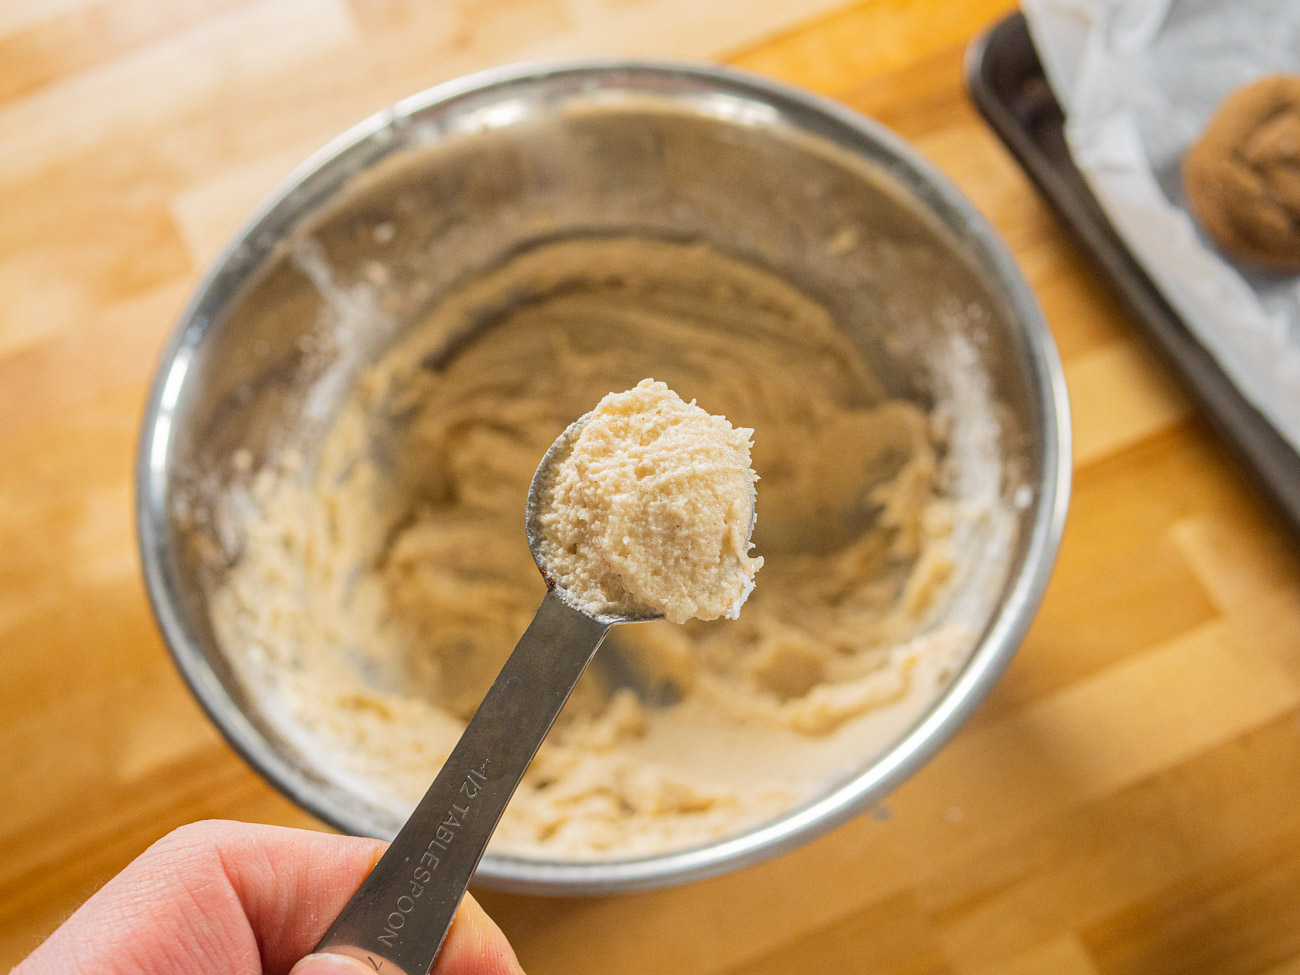 Scoop a 2 teaspoon ball of dough into your hands and roll.